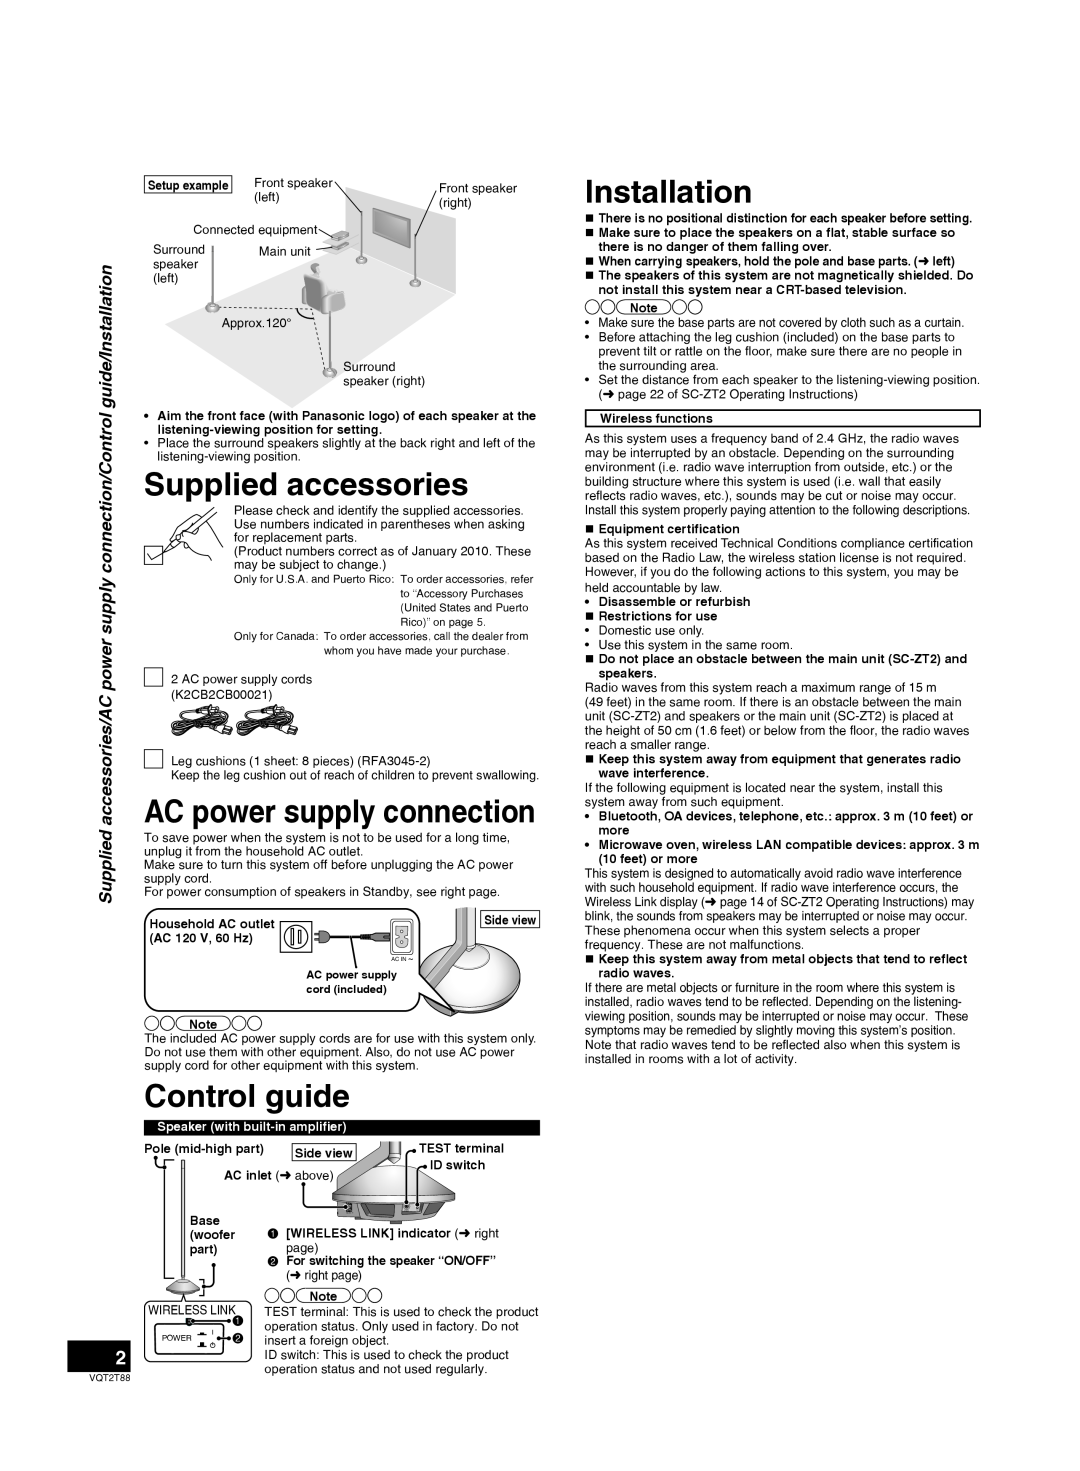 Panasonic SB-ZT1, SB-ZT2 Supplied accessories, Control guide, Installation, AC power supply connection 